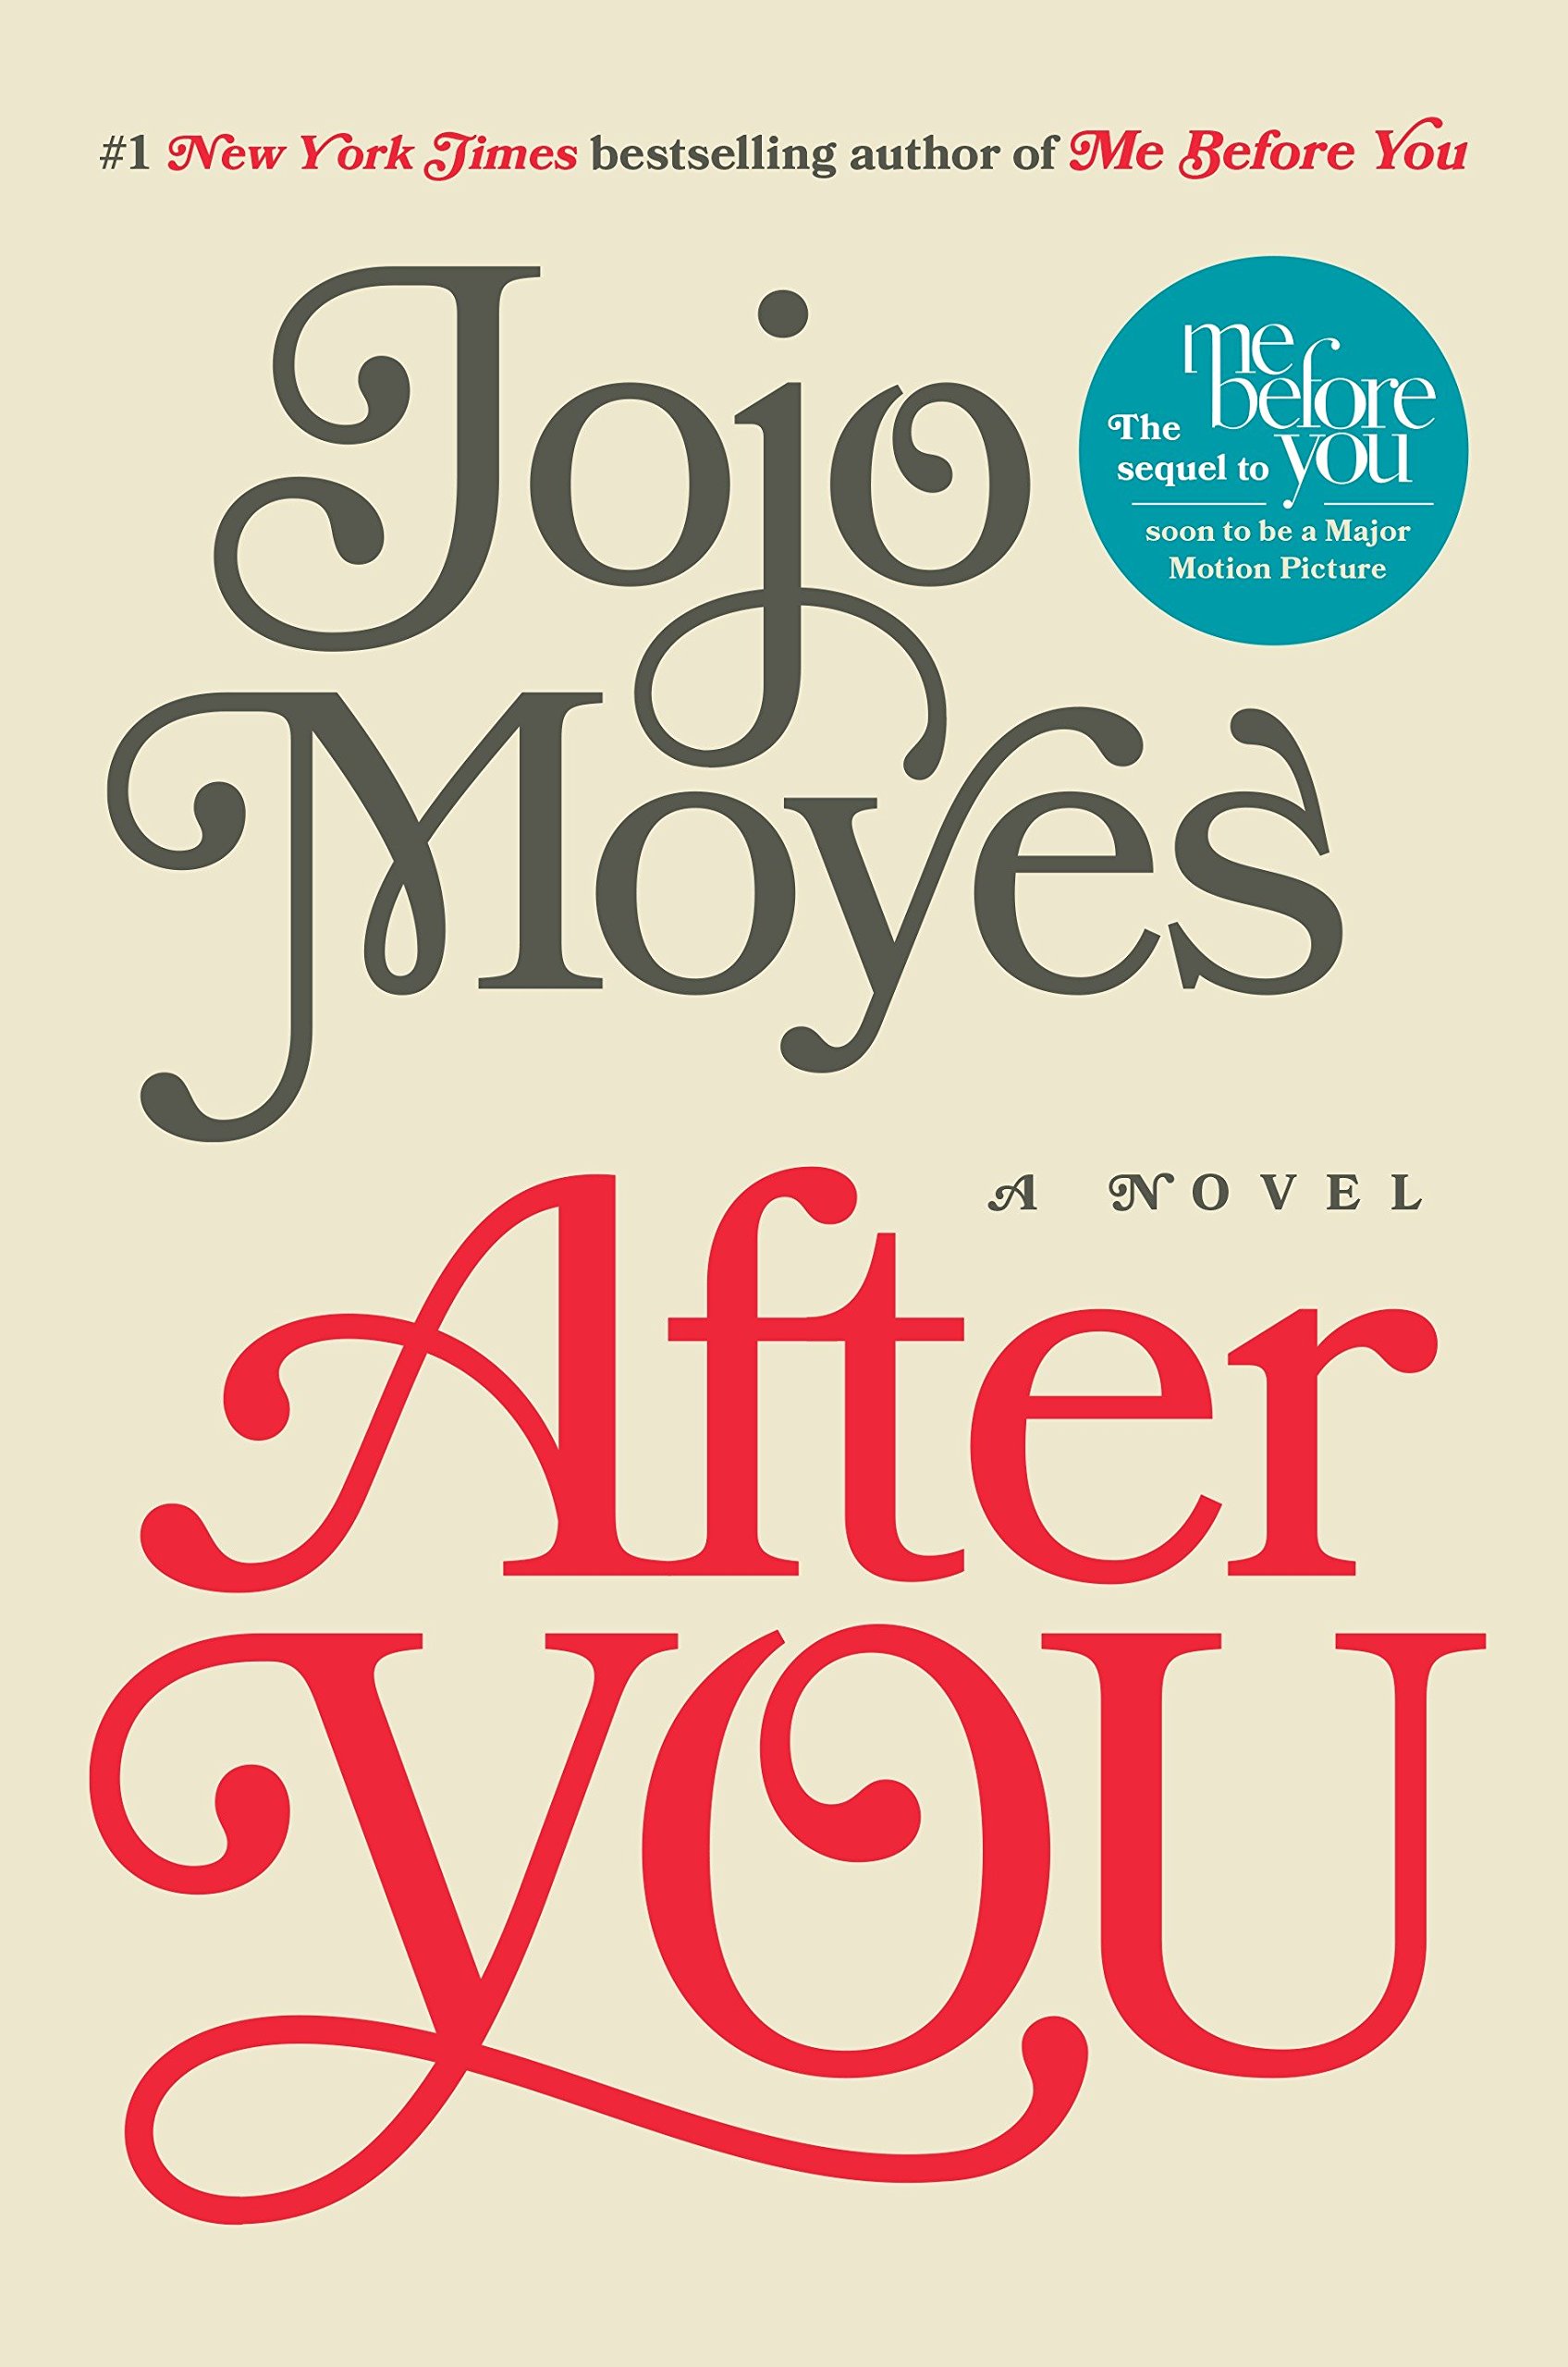 Jojo Moyes: After you (2015)